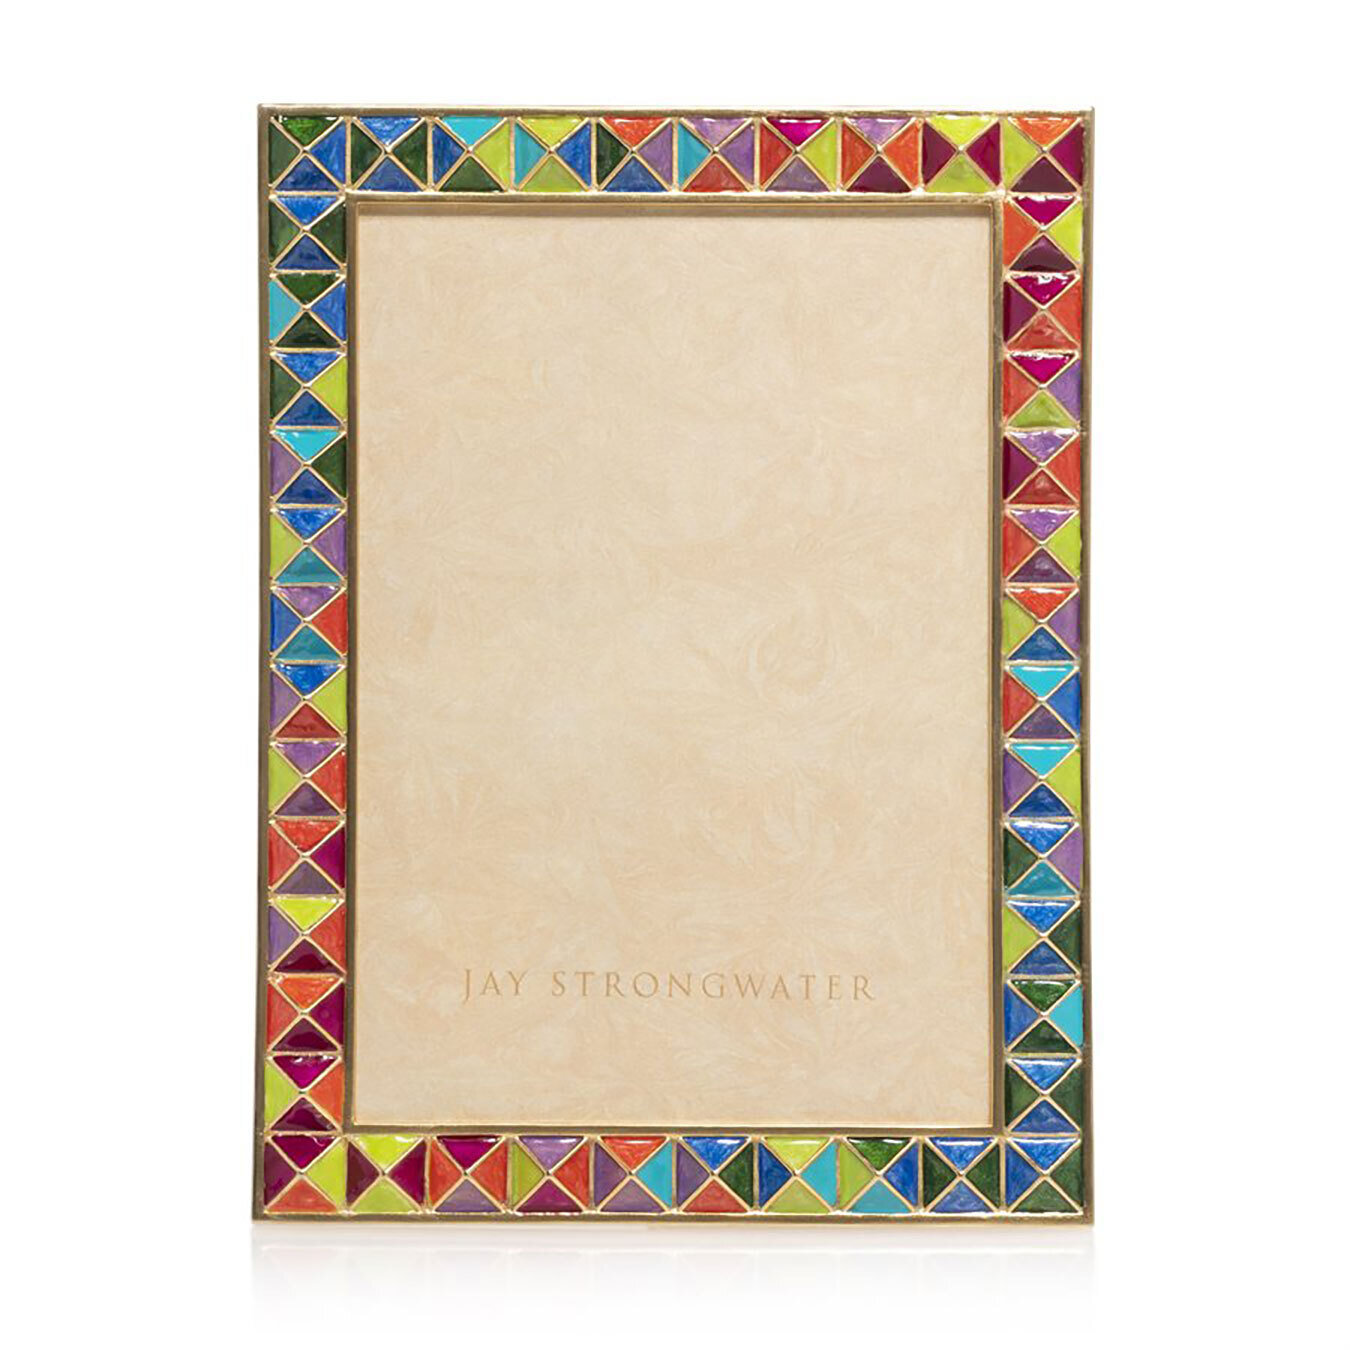 Jay Strongwater Pyramid 8 X 10 Inch Picture Frame SPF5878-202